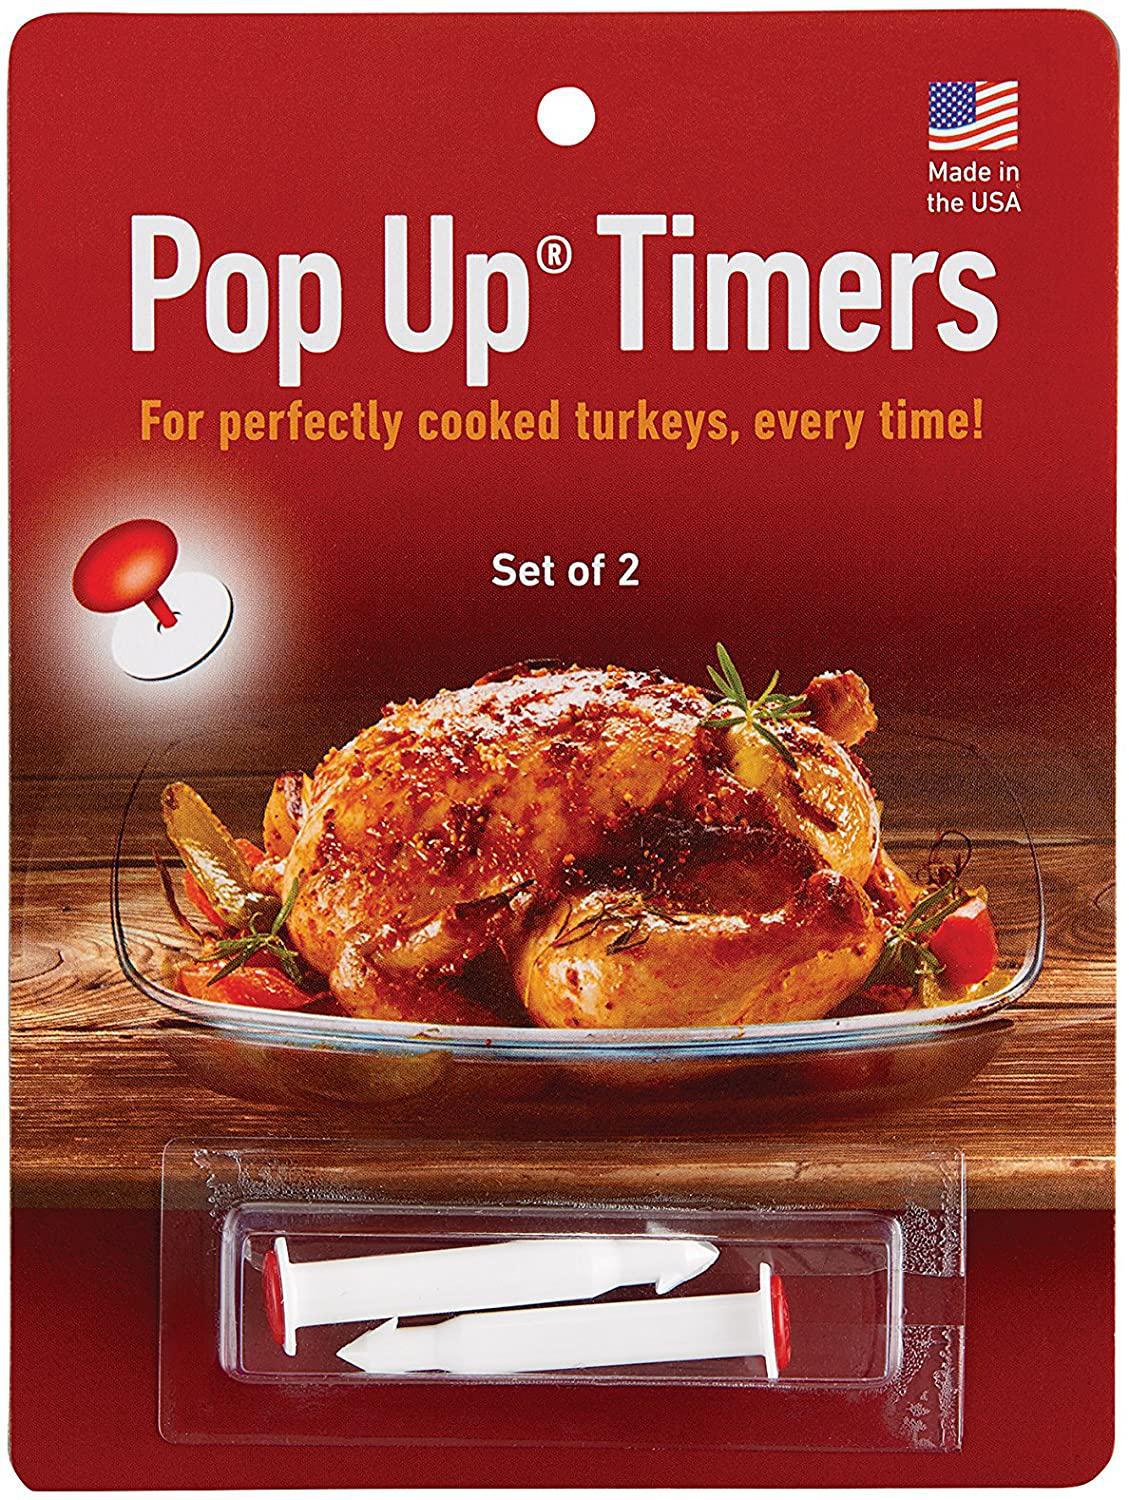 Use a Digital Thermometer Instead of a Turkey's Pop-up Thermometer